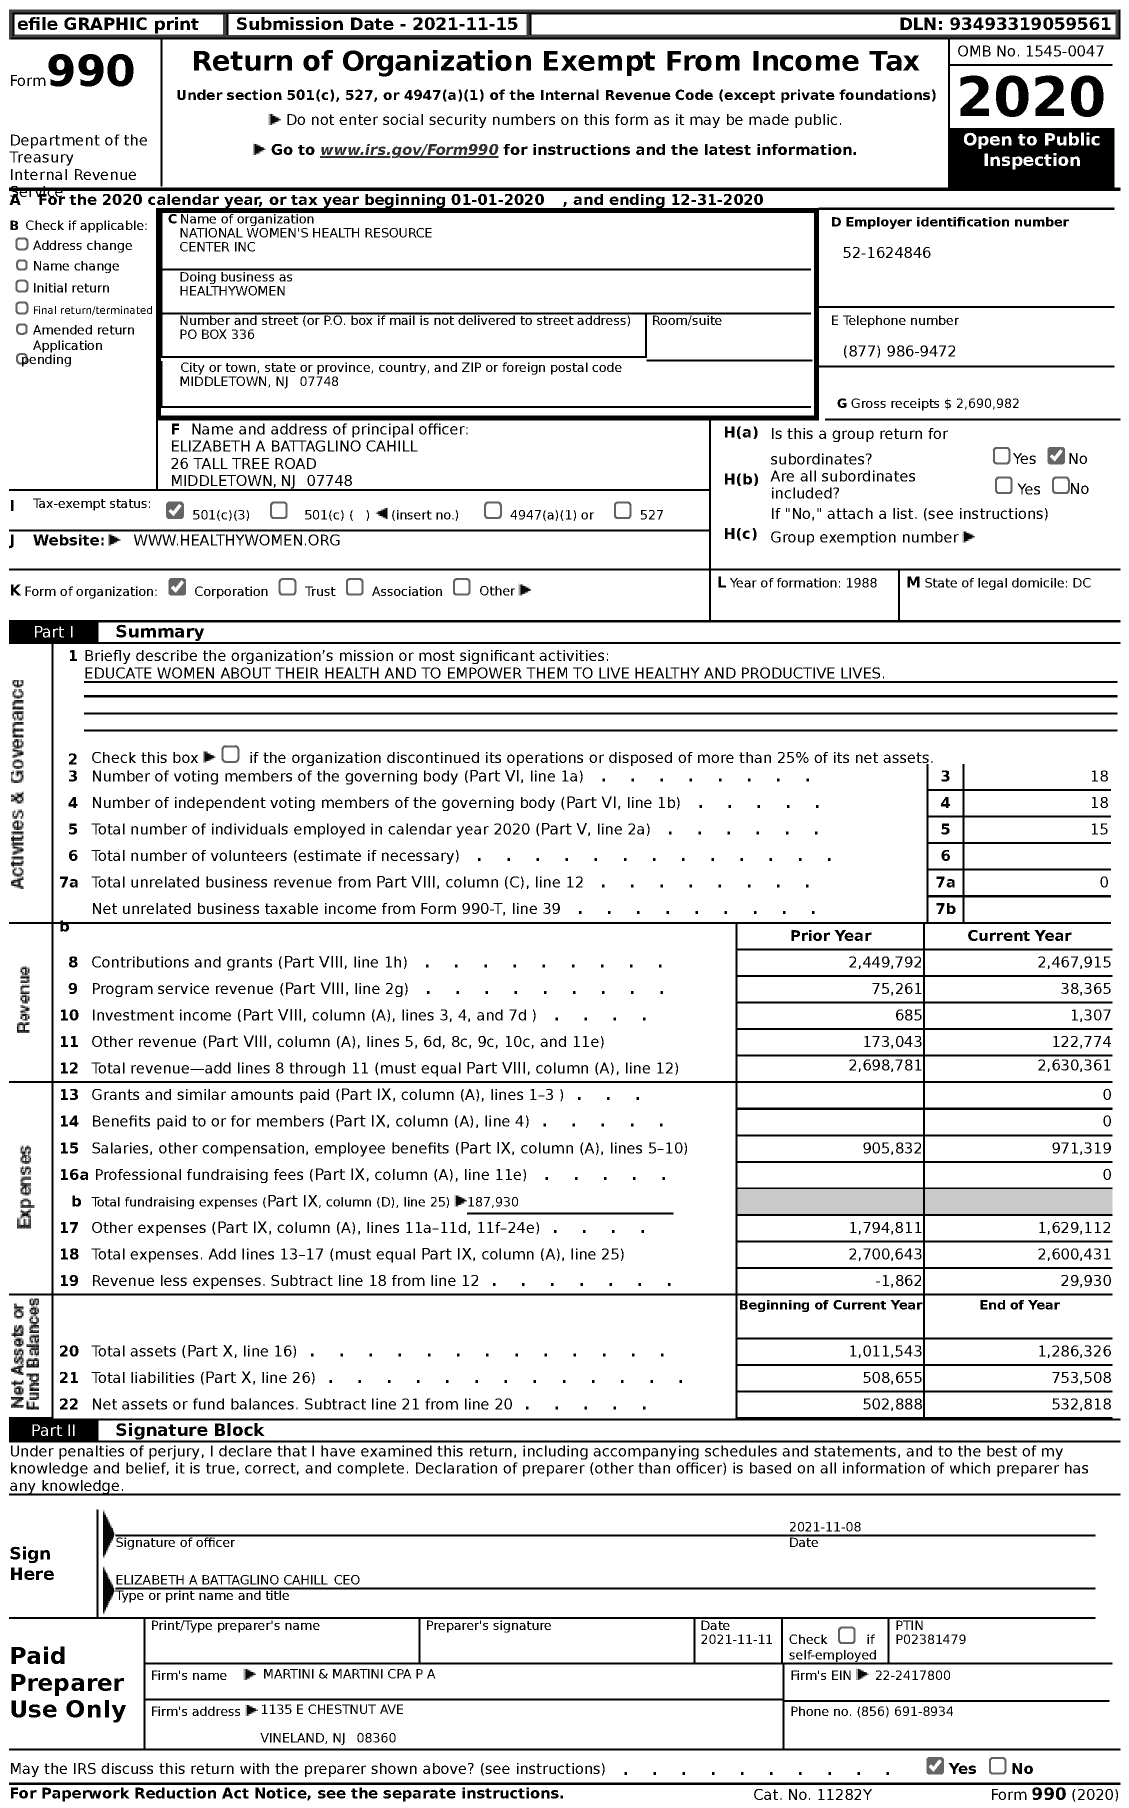 Image of first page of 2020 Form 990 for HealthyWomen (HW)